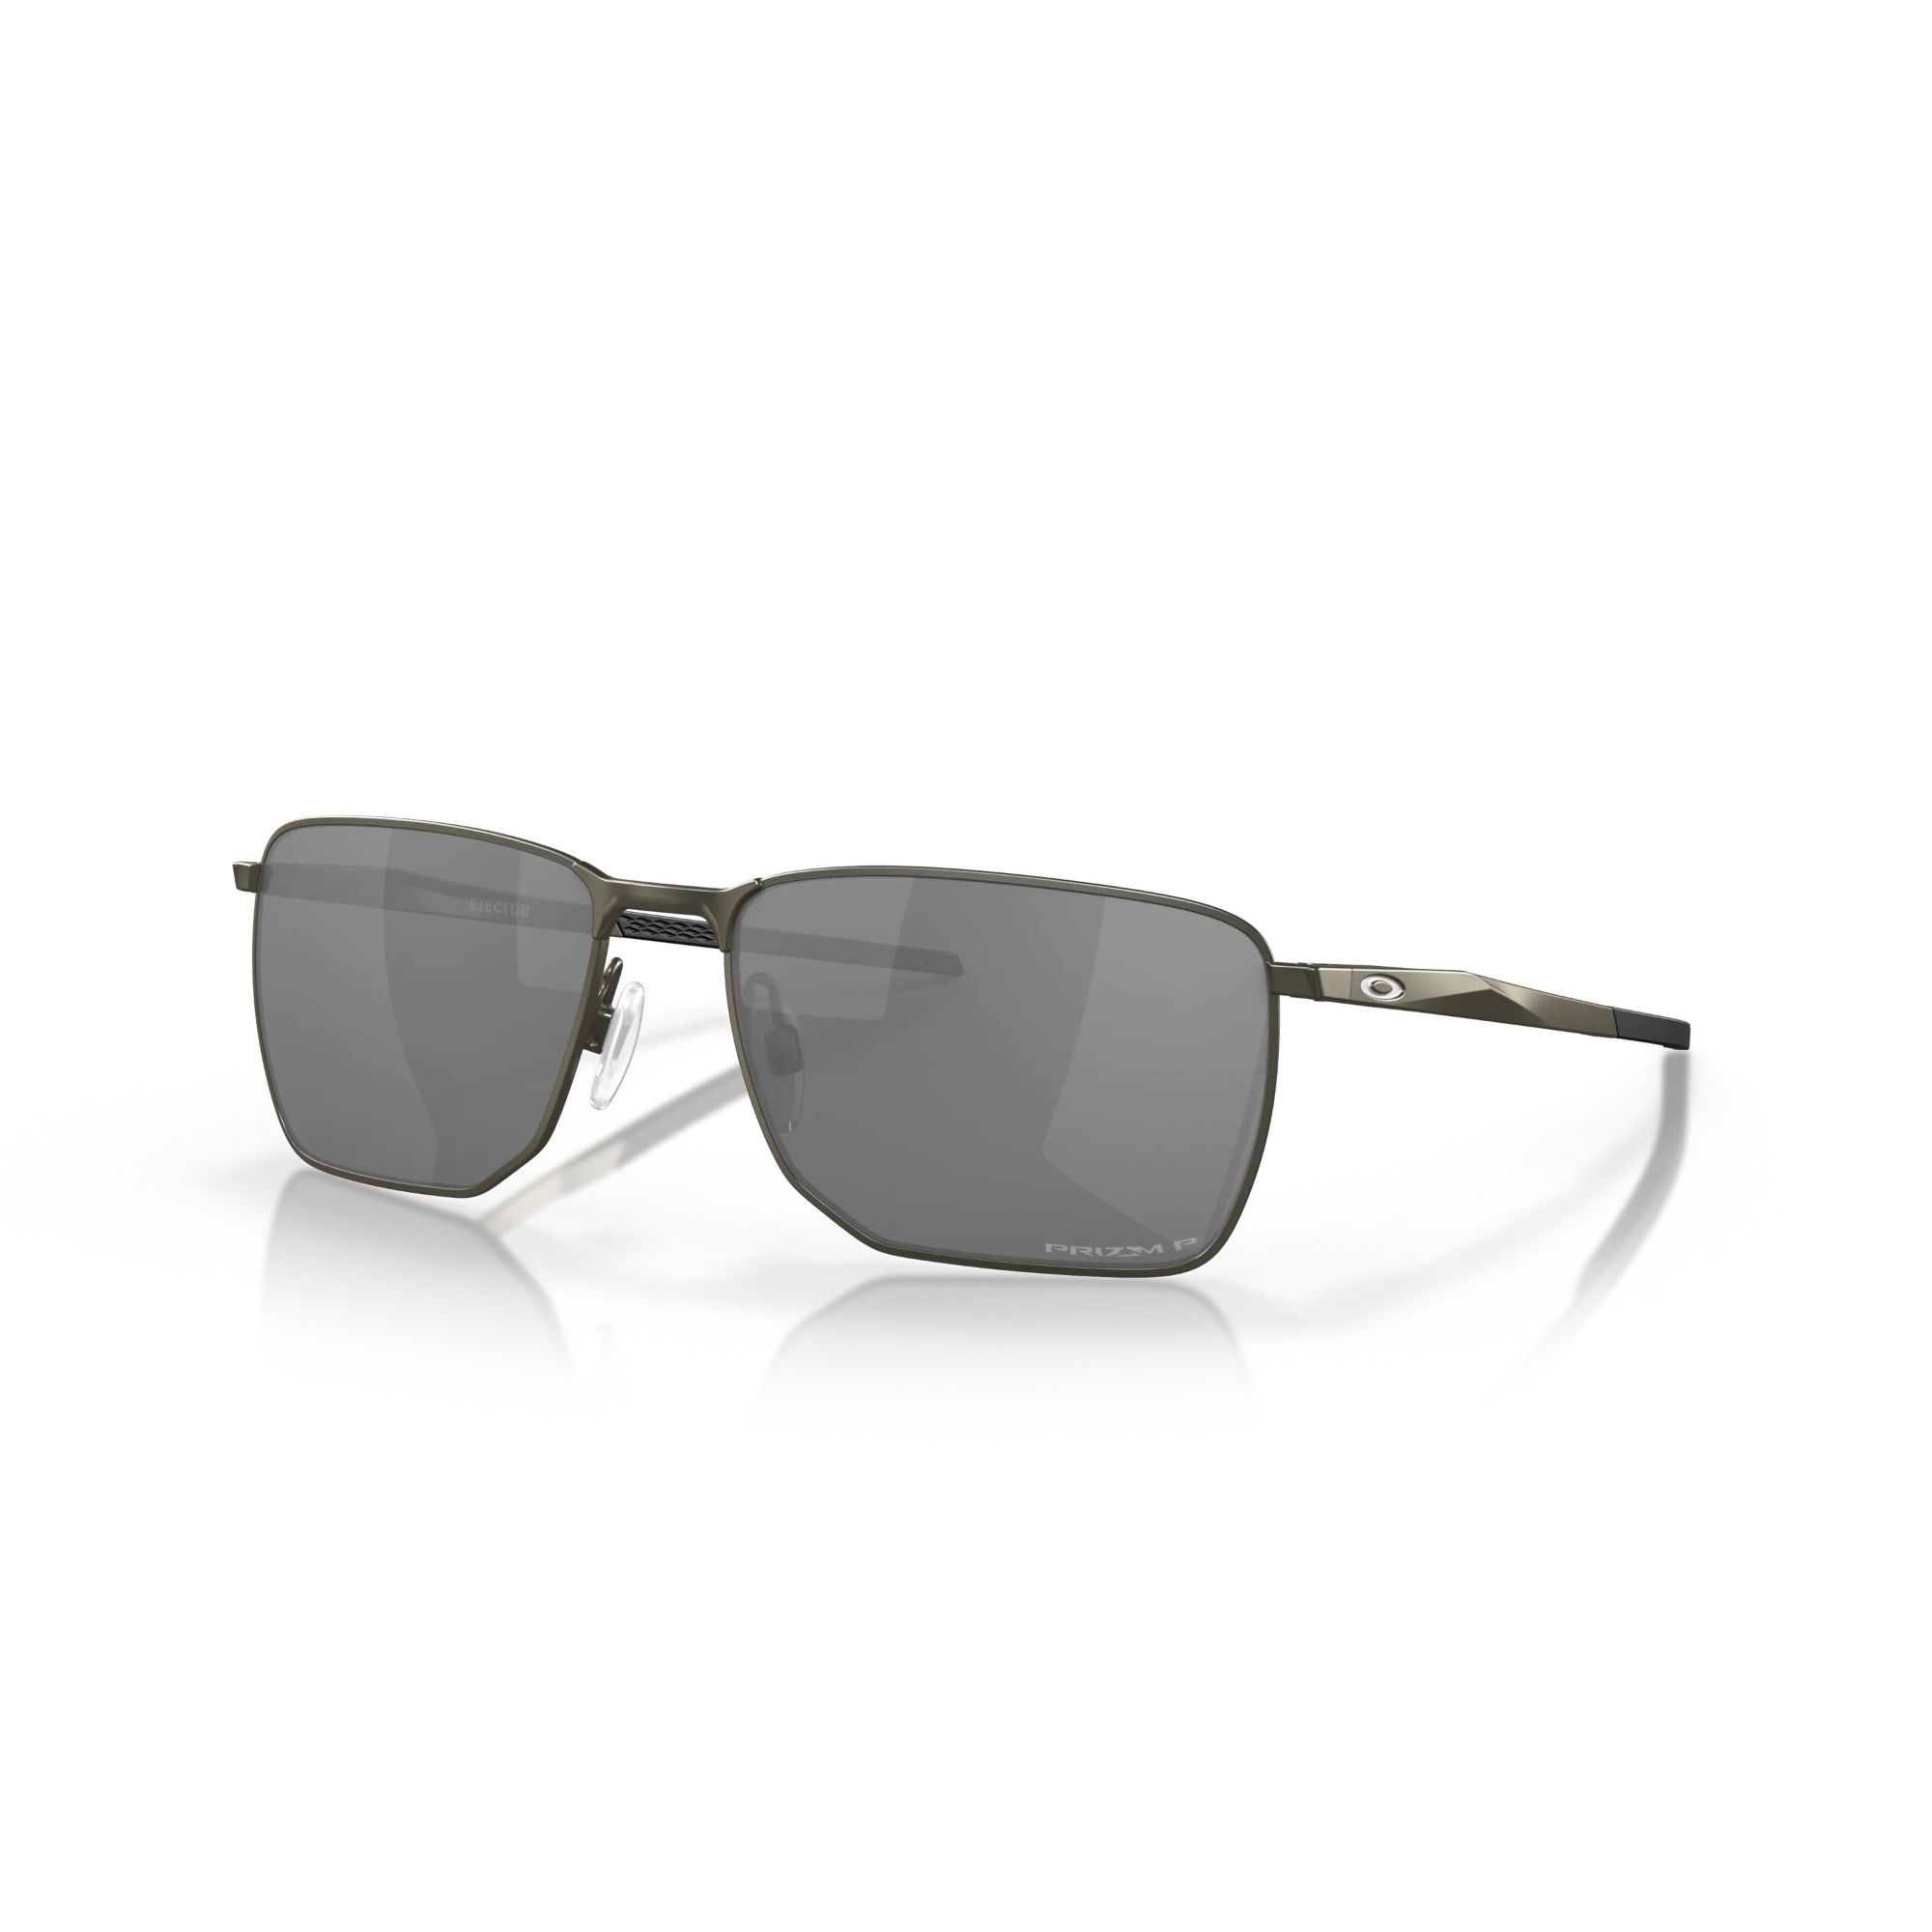 Ejector Sunglasses OO4142-03 size 58